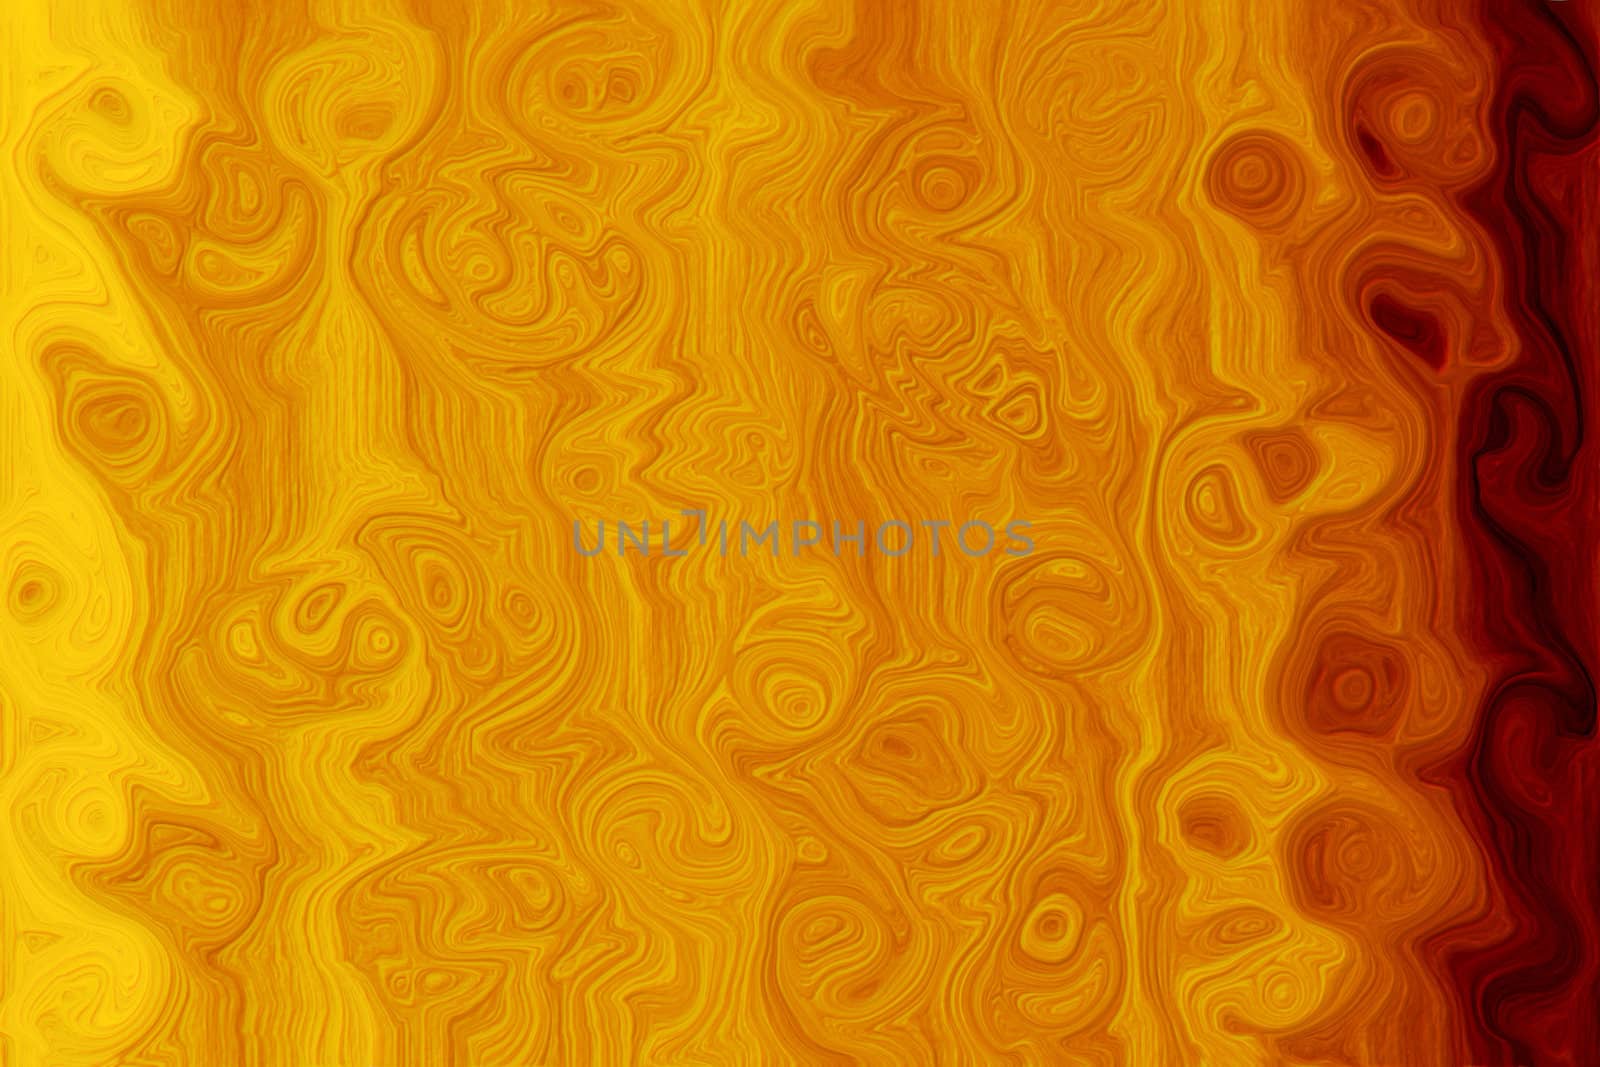 Abstract art wood texture background by Nonneljohn